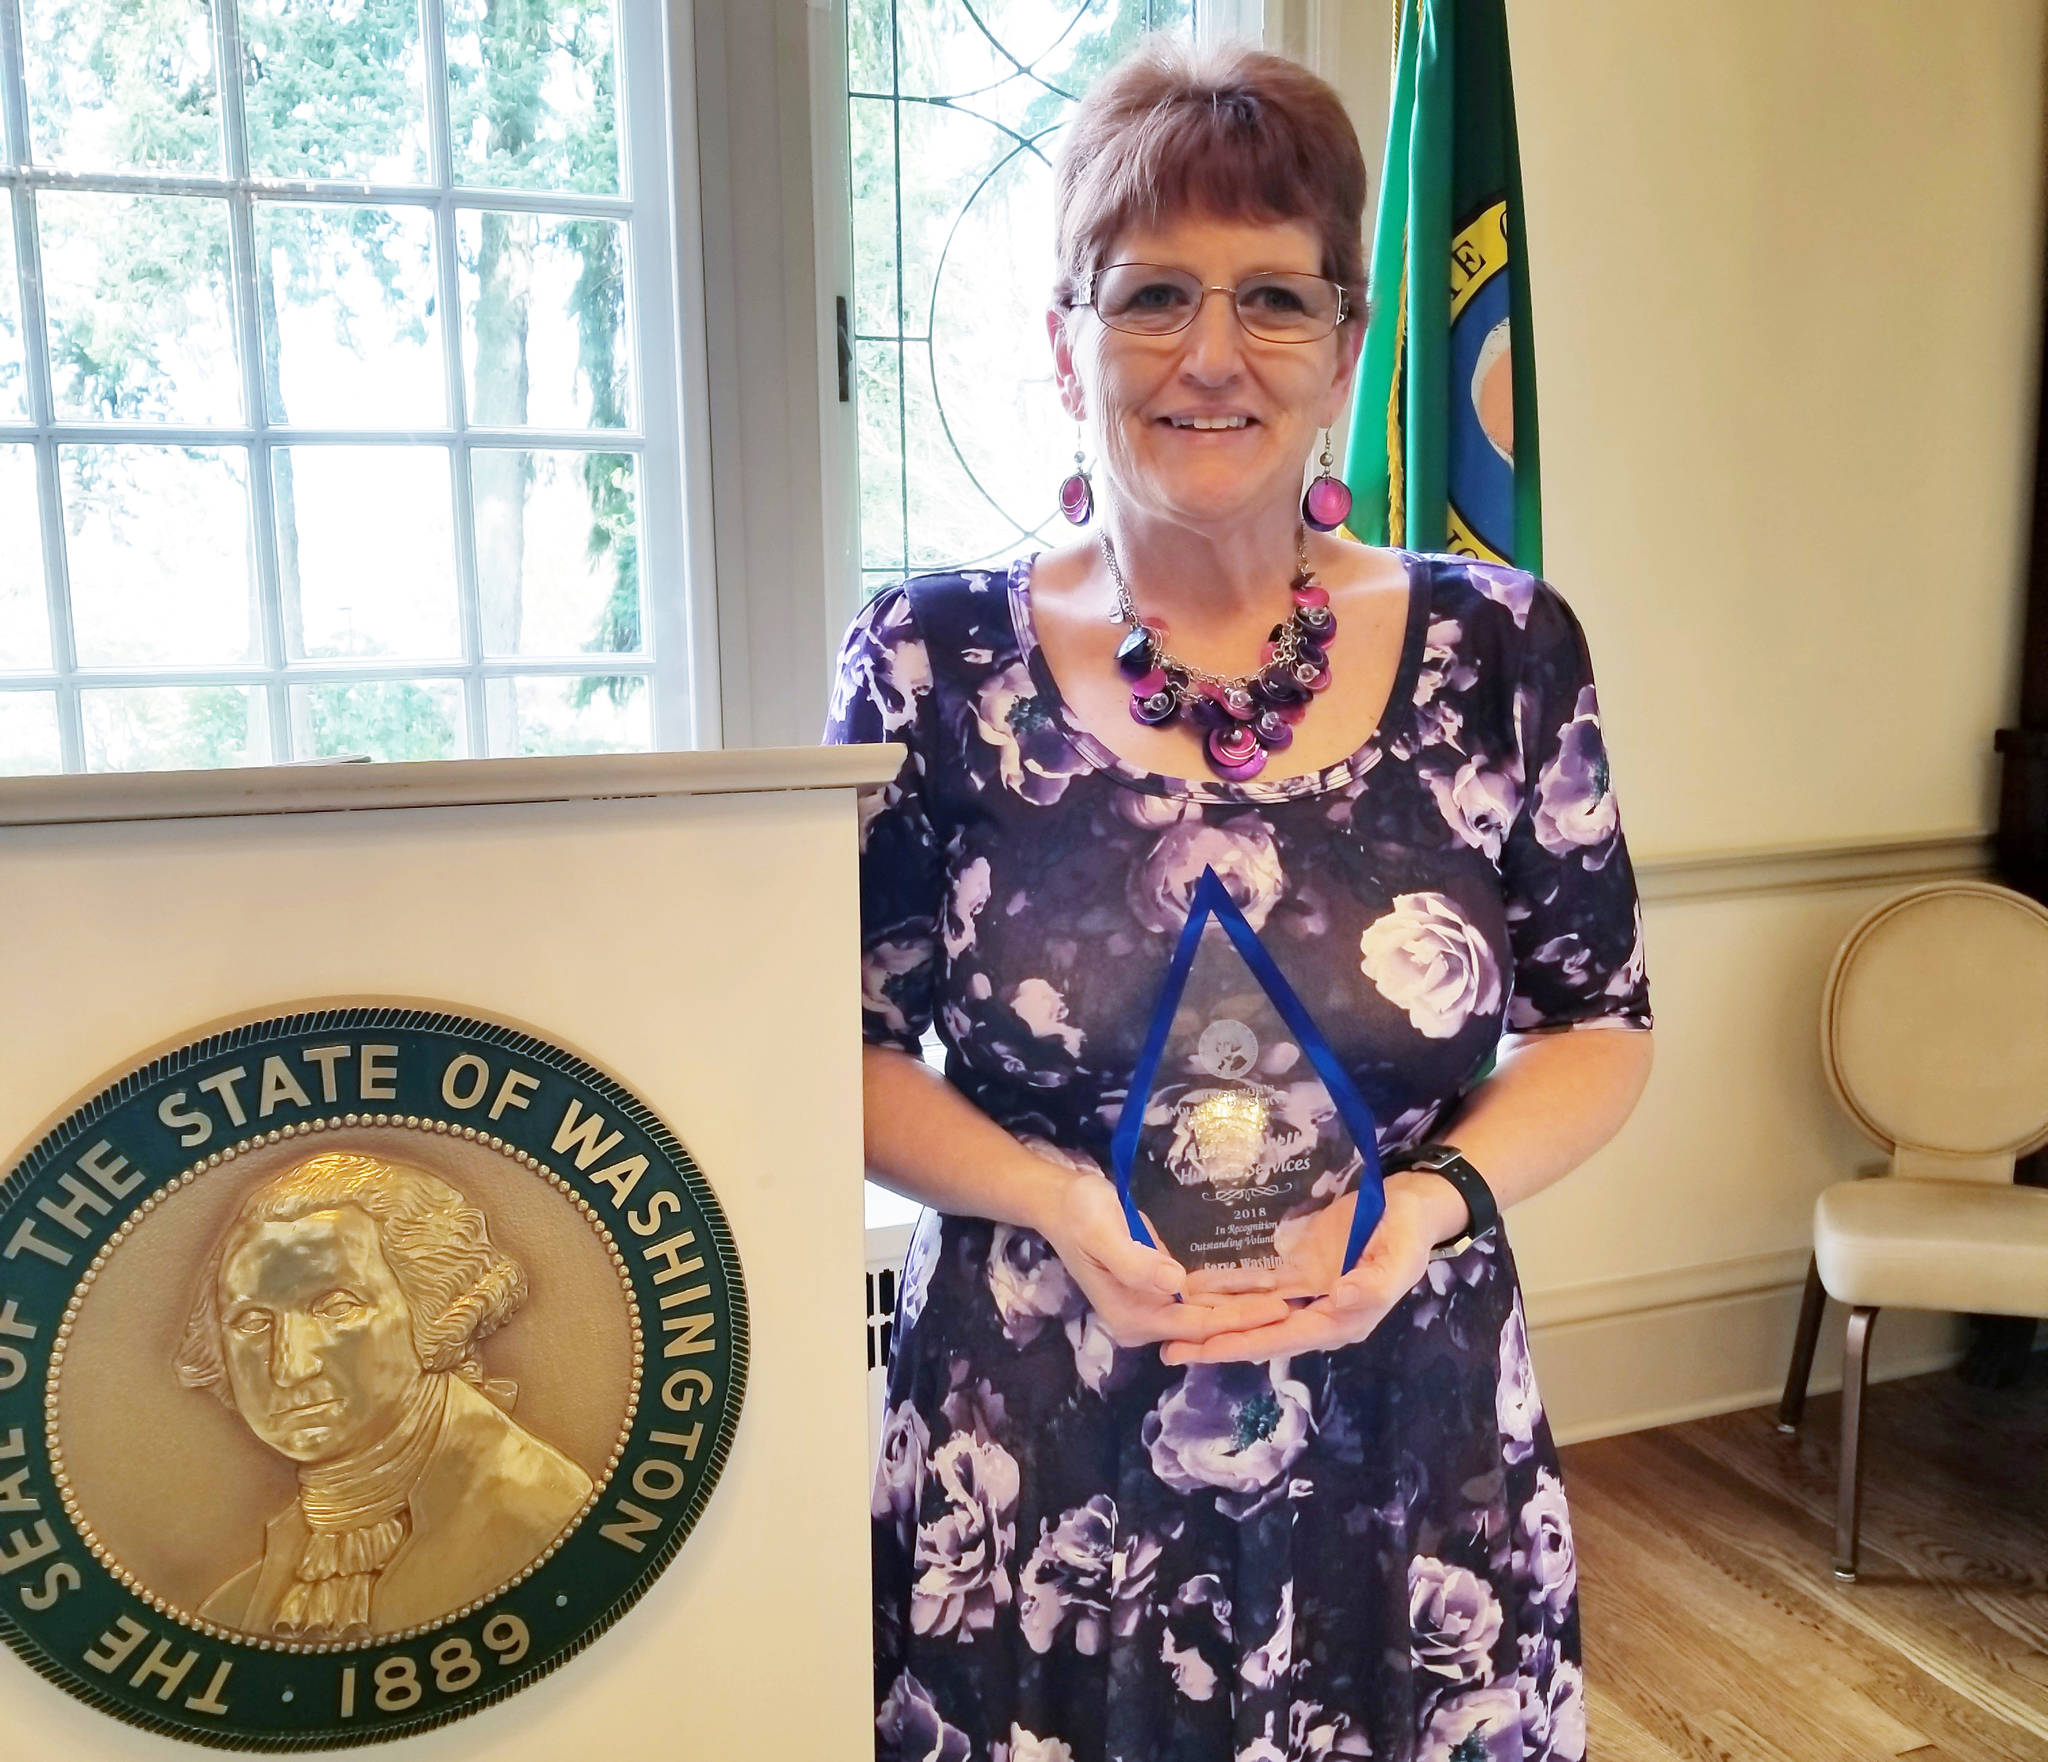 Amy Howell was honored last month at the governor’s mansion with the Governor’s Volunteer Award for coordinating the Food For Thought Children’s Backpack Program and other contributions.